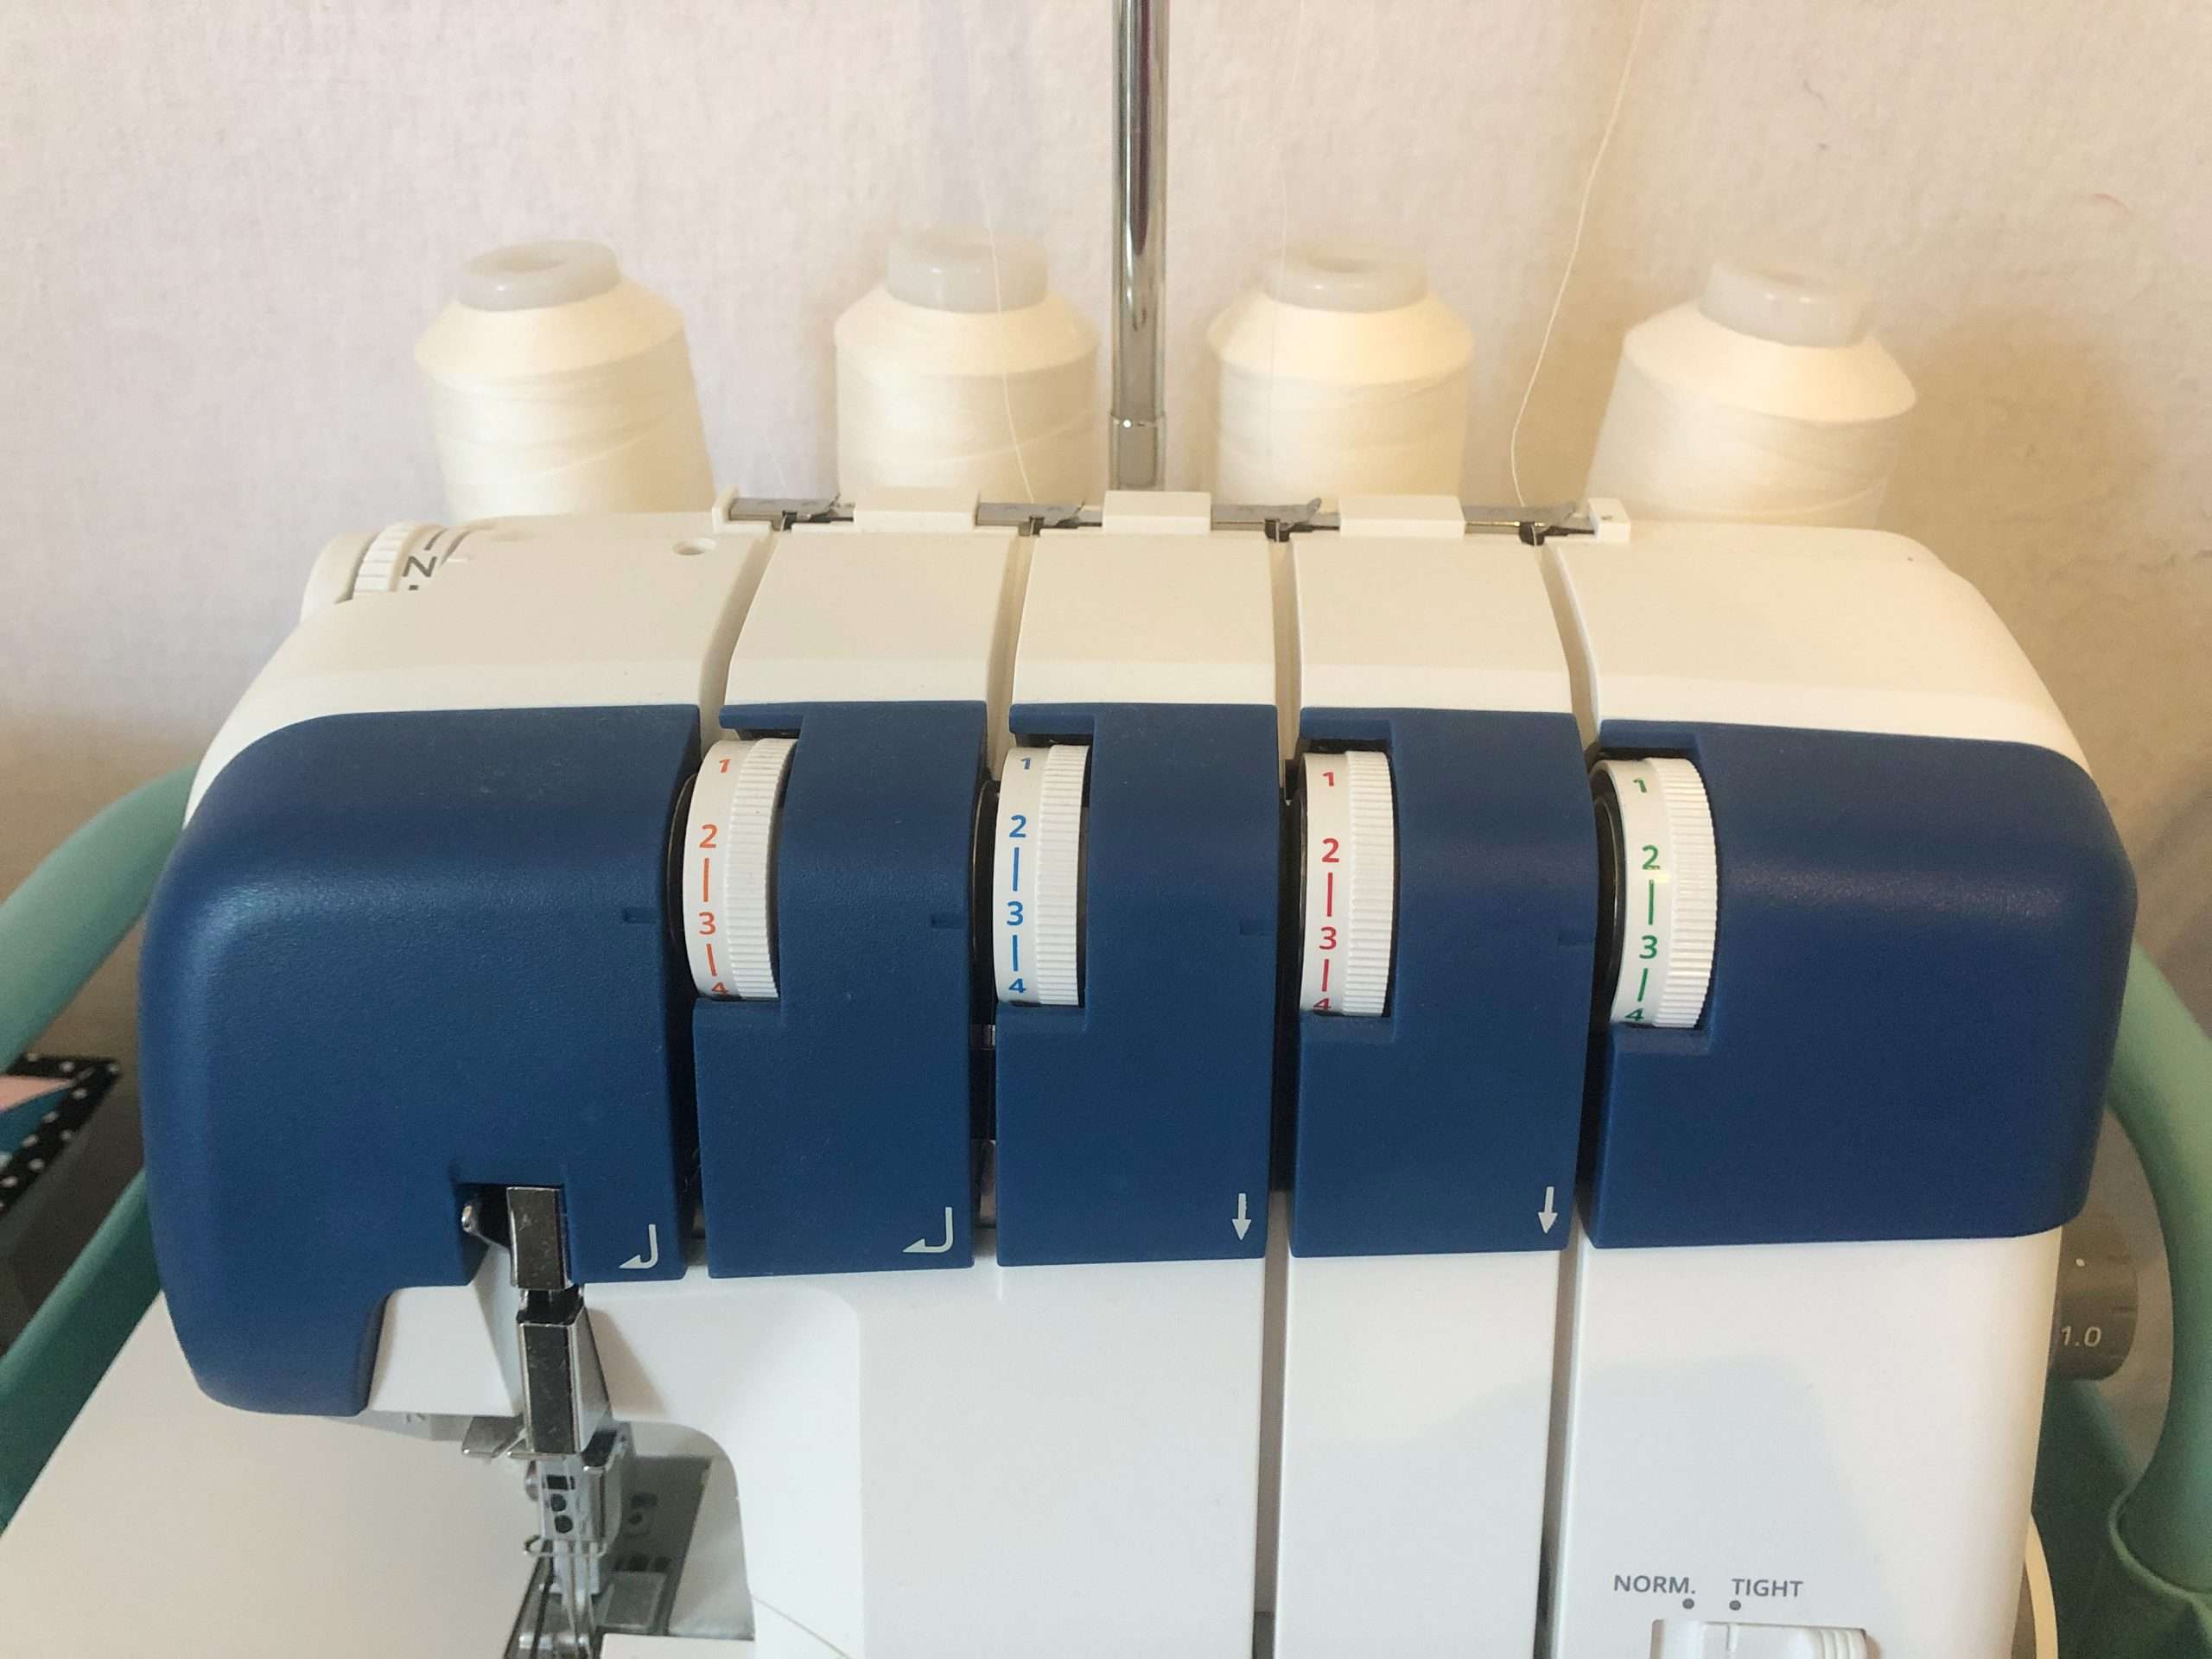 Getting Started With a Serger